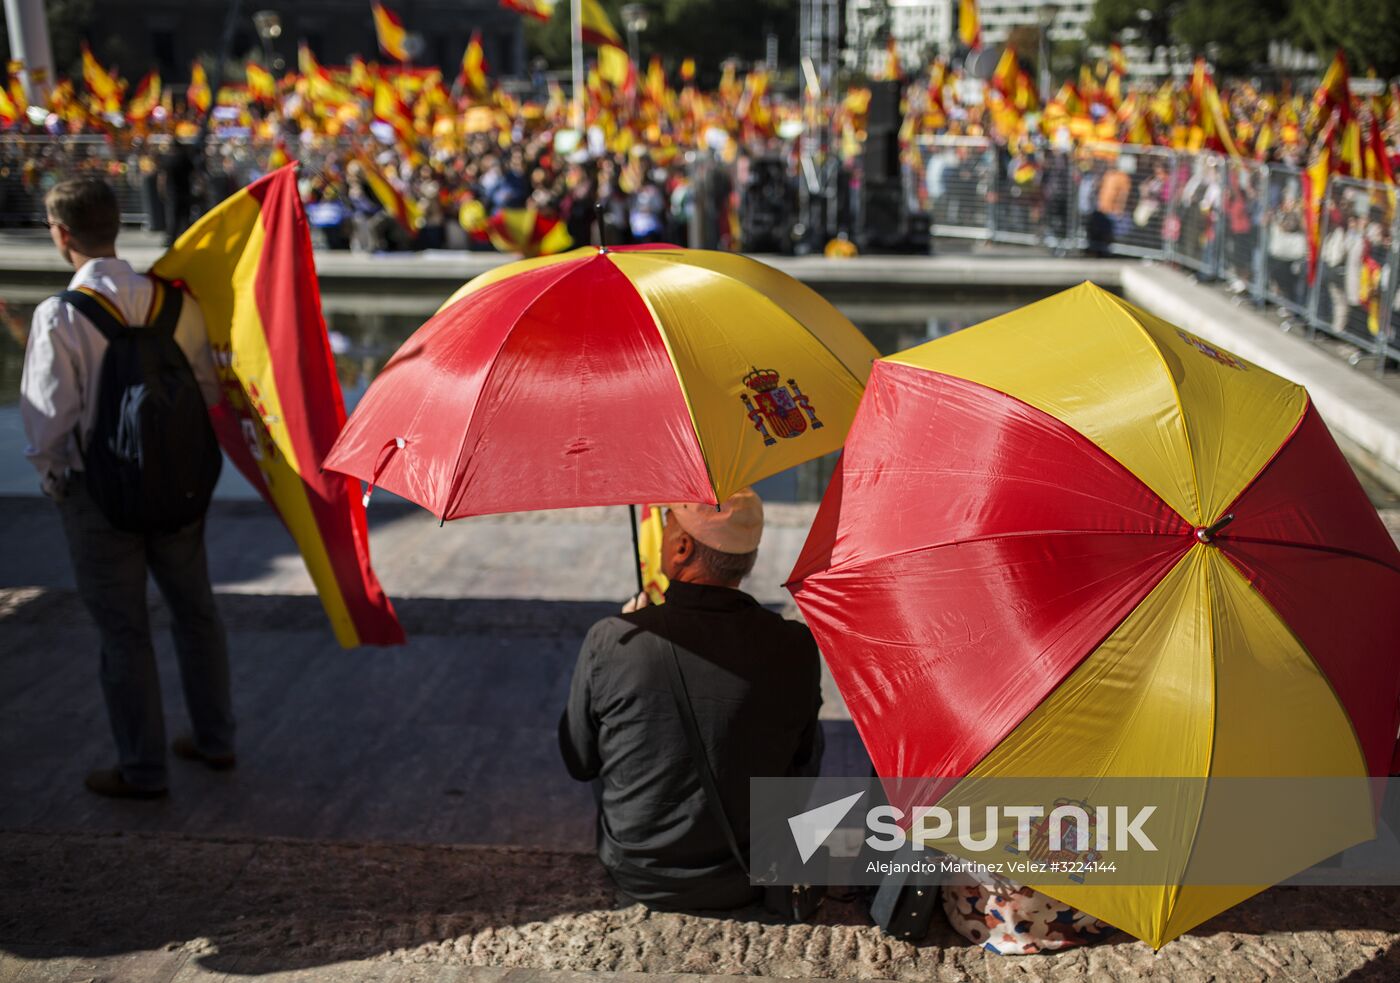 Rally in Madrid in support of Spain's unity